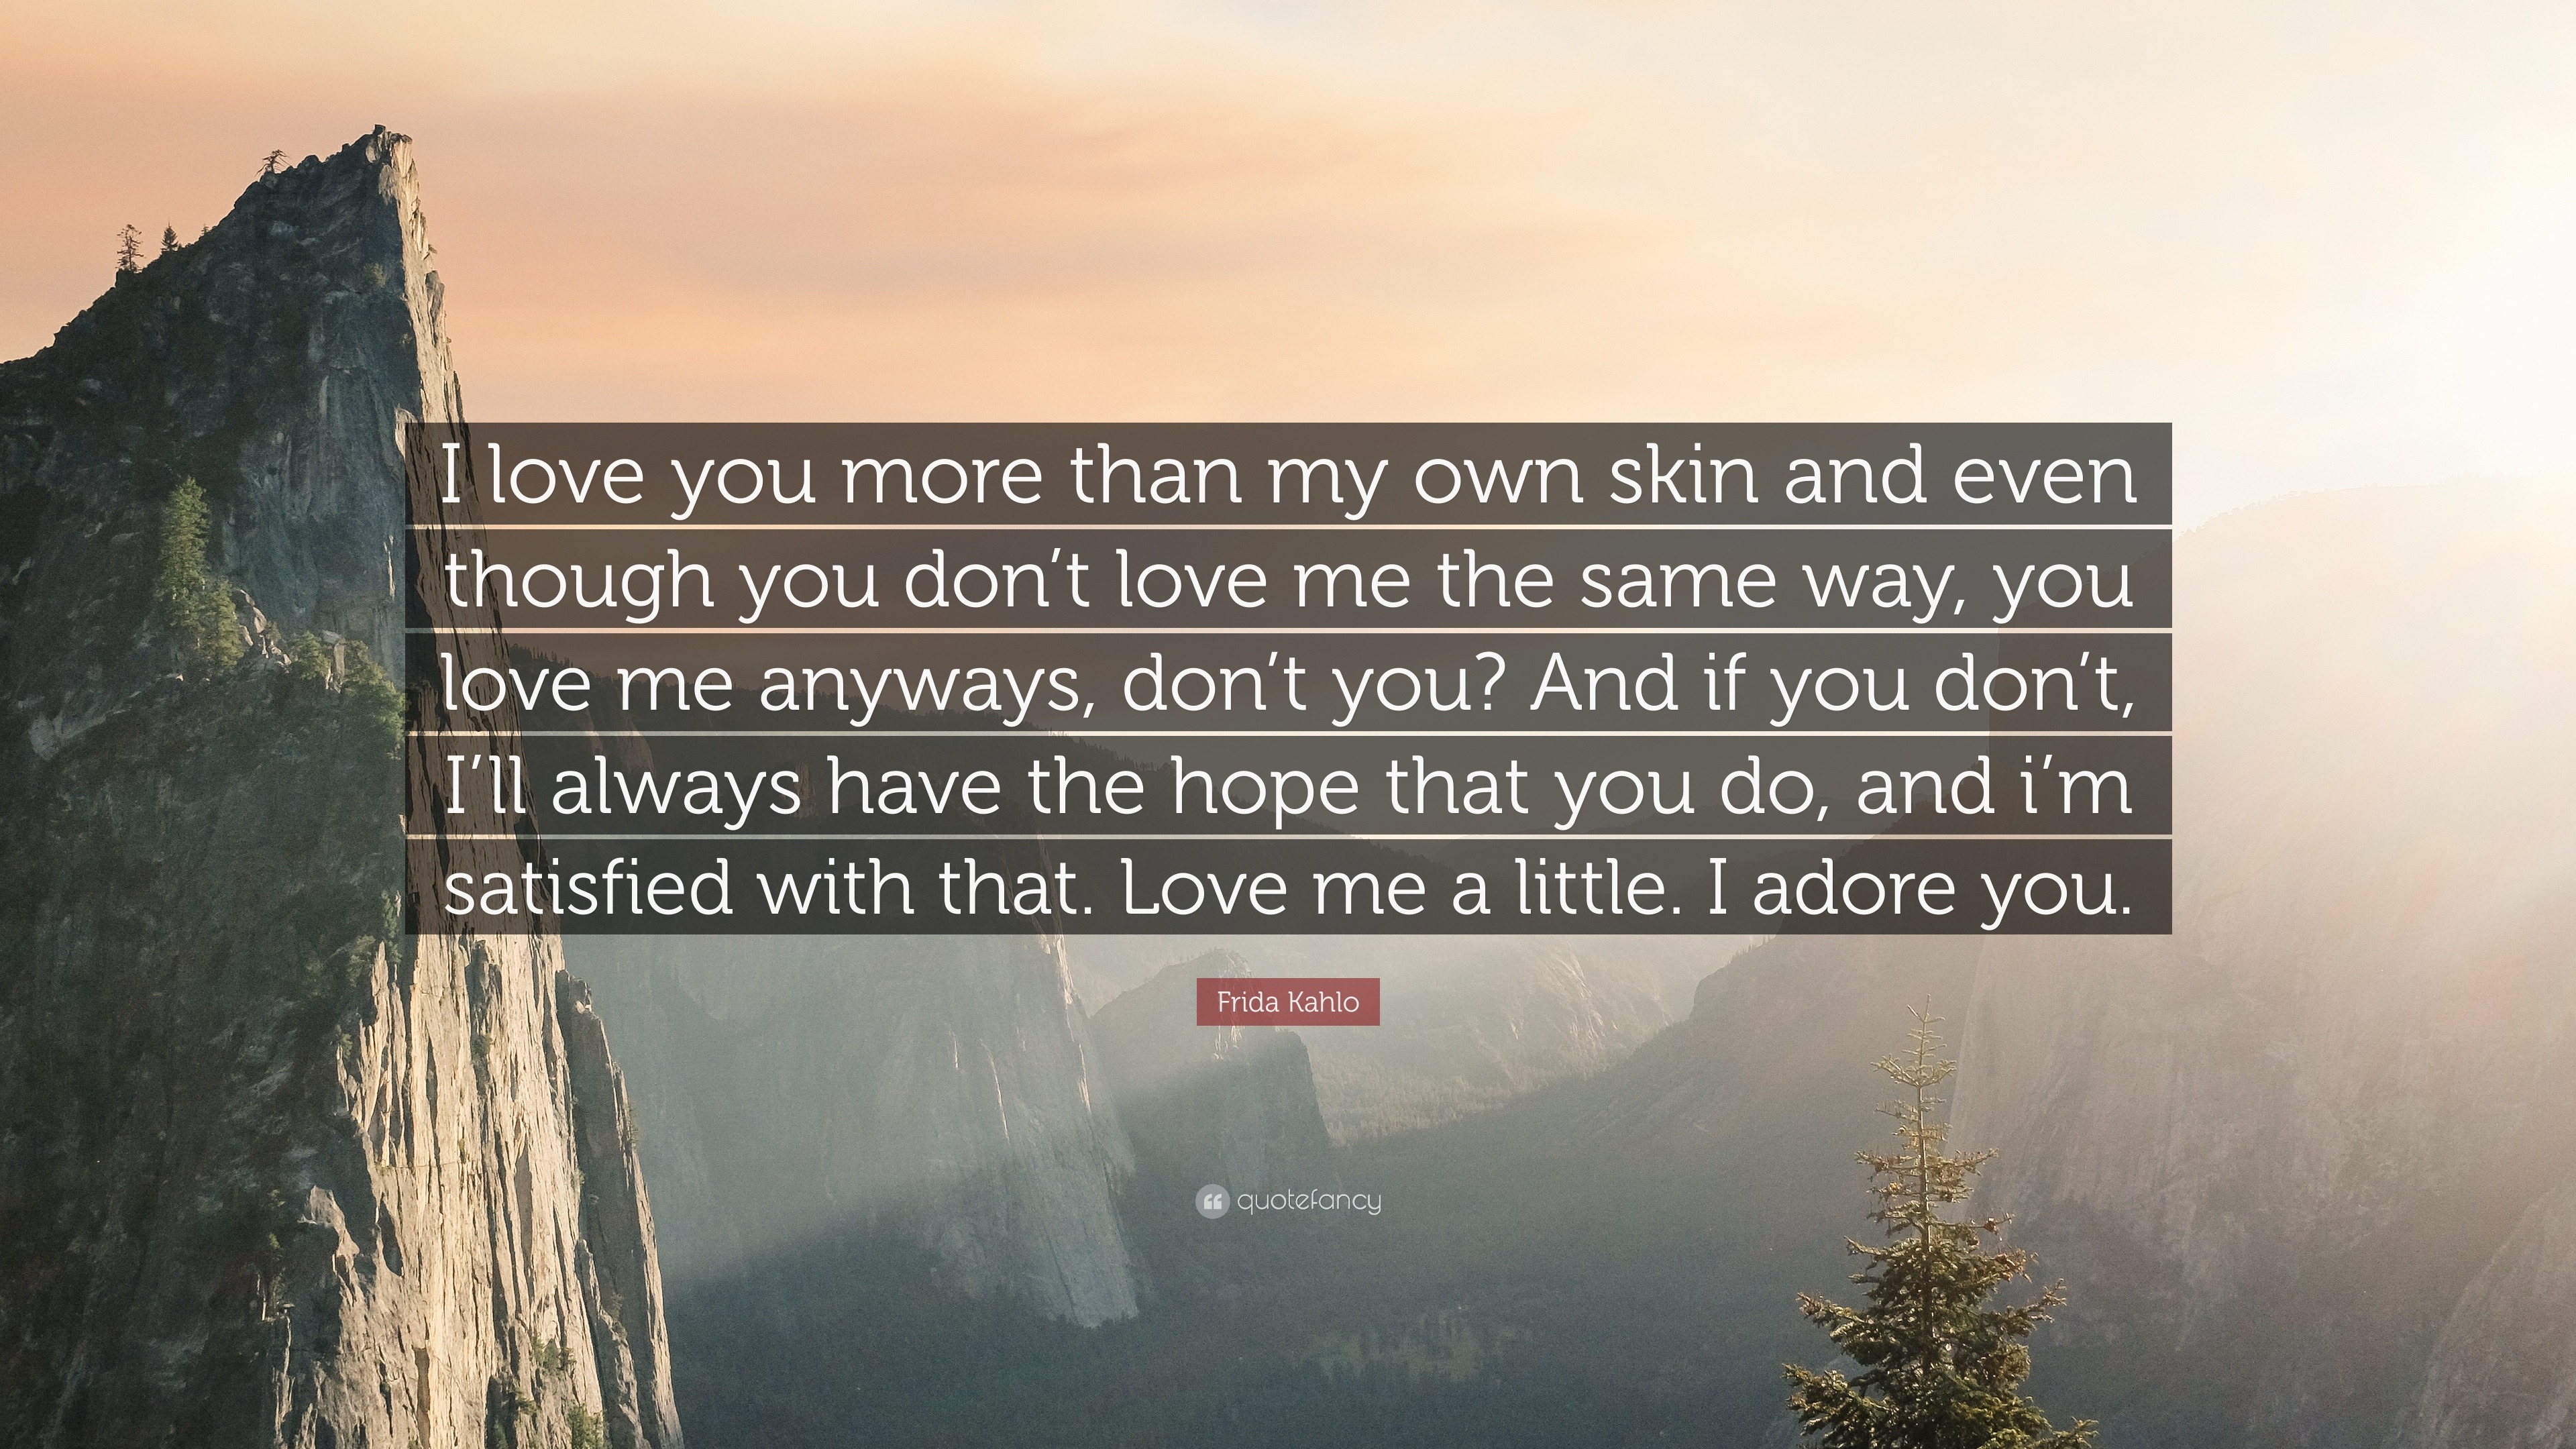 Frida Kahlo Quote “I love you more than my own skin and even though